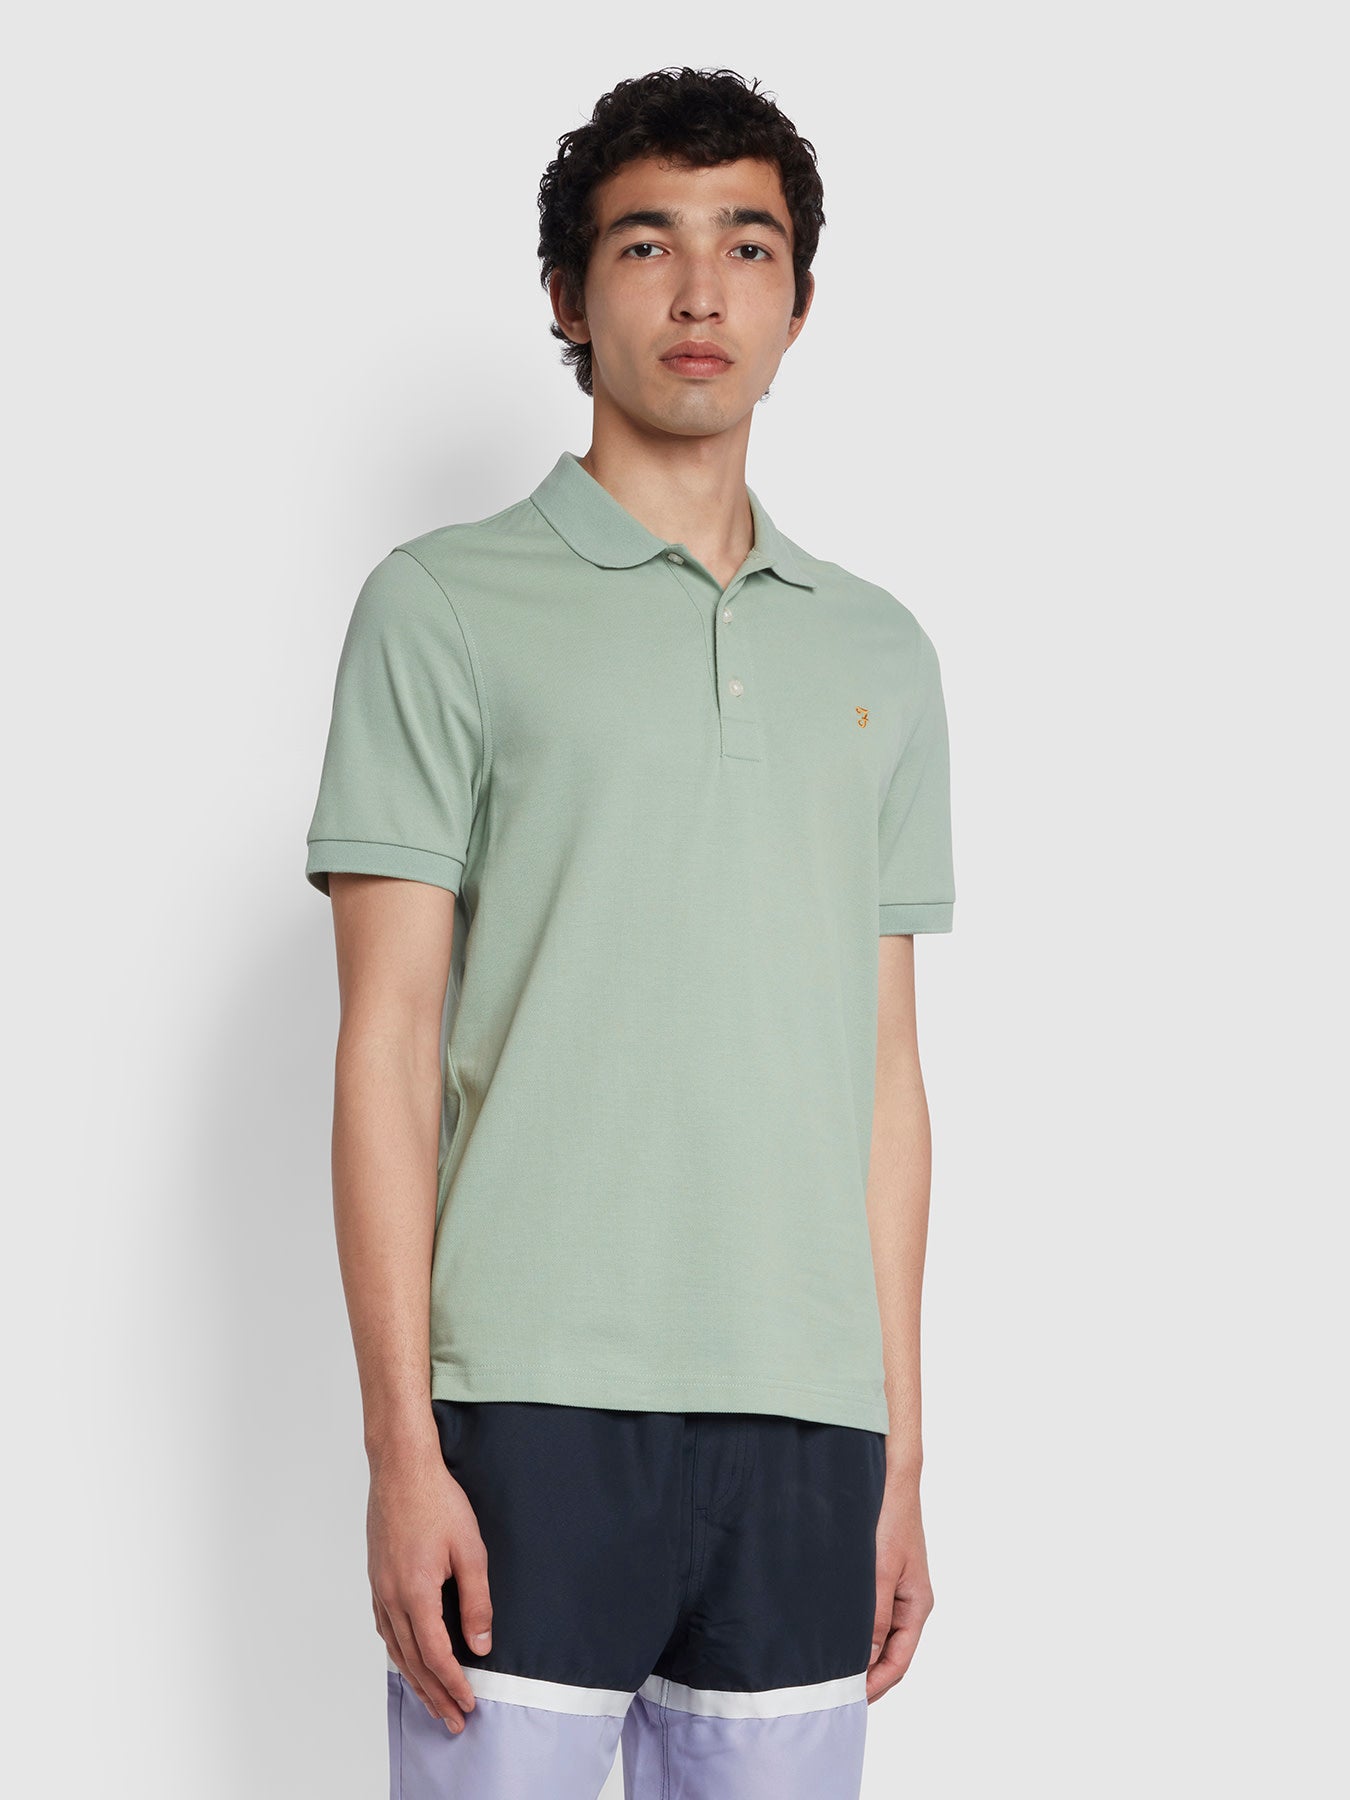 View Blanes Slim Fit Organic Cotton Polo Shirt In Summer Green information